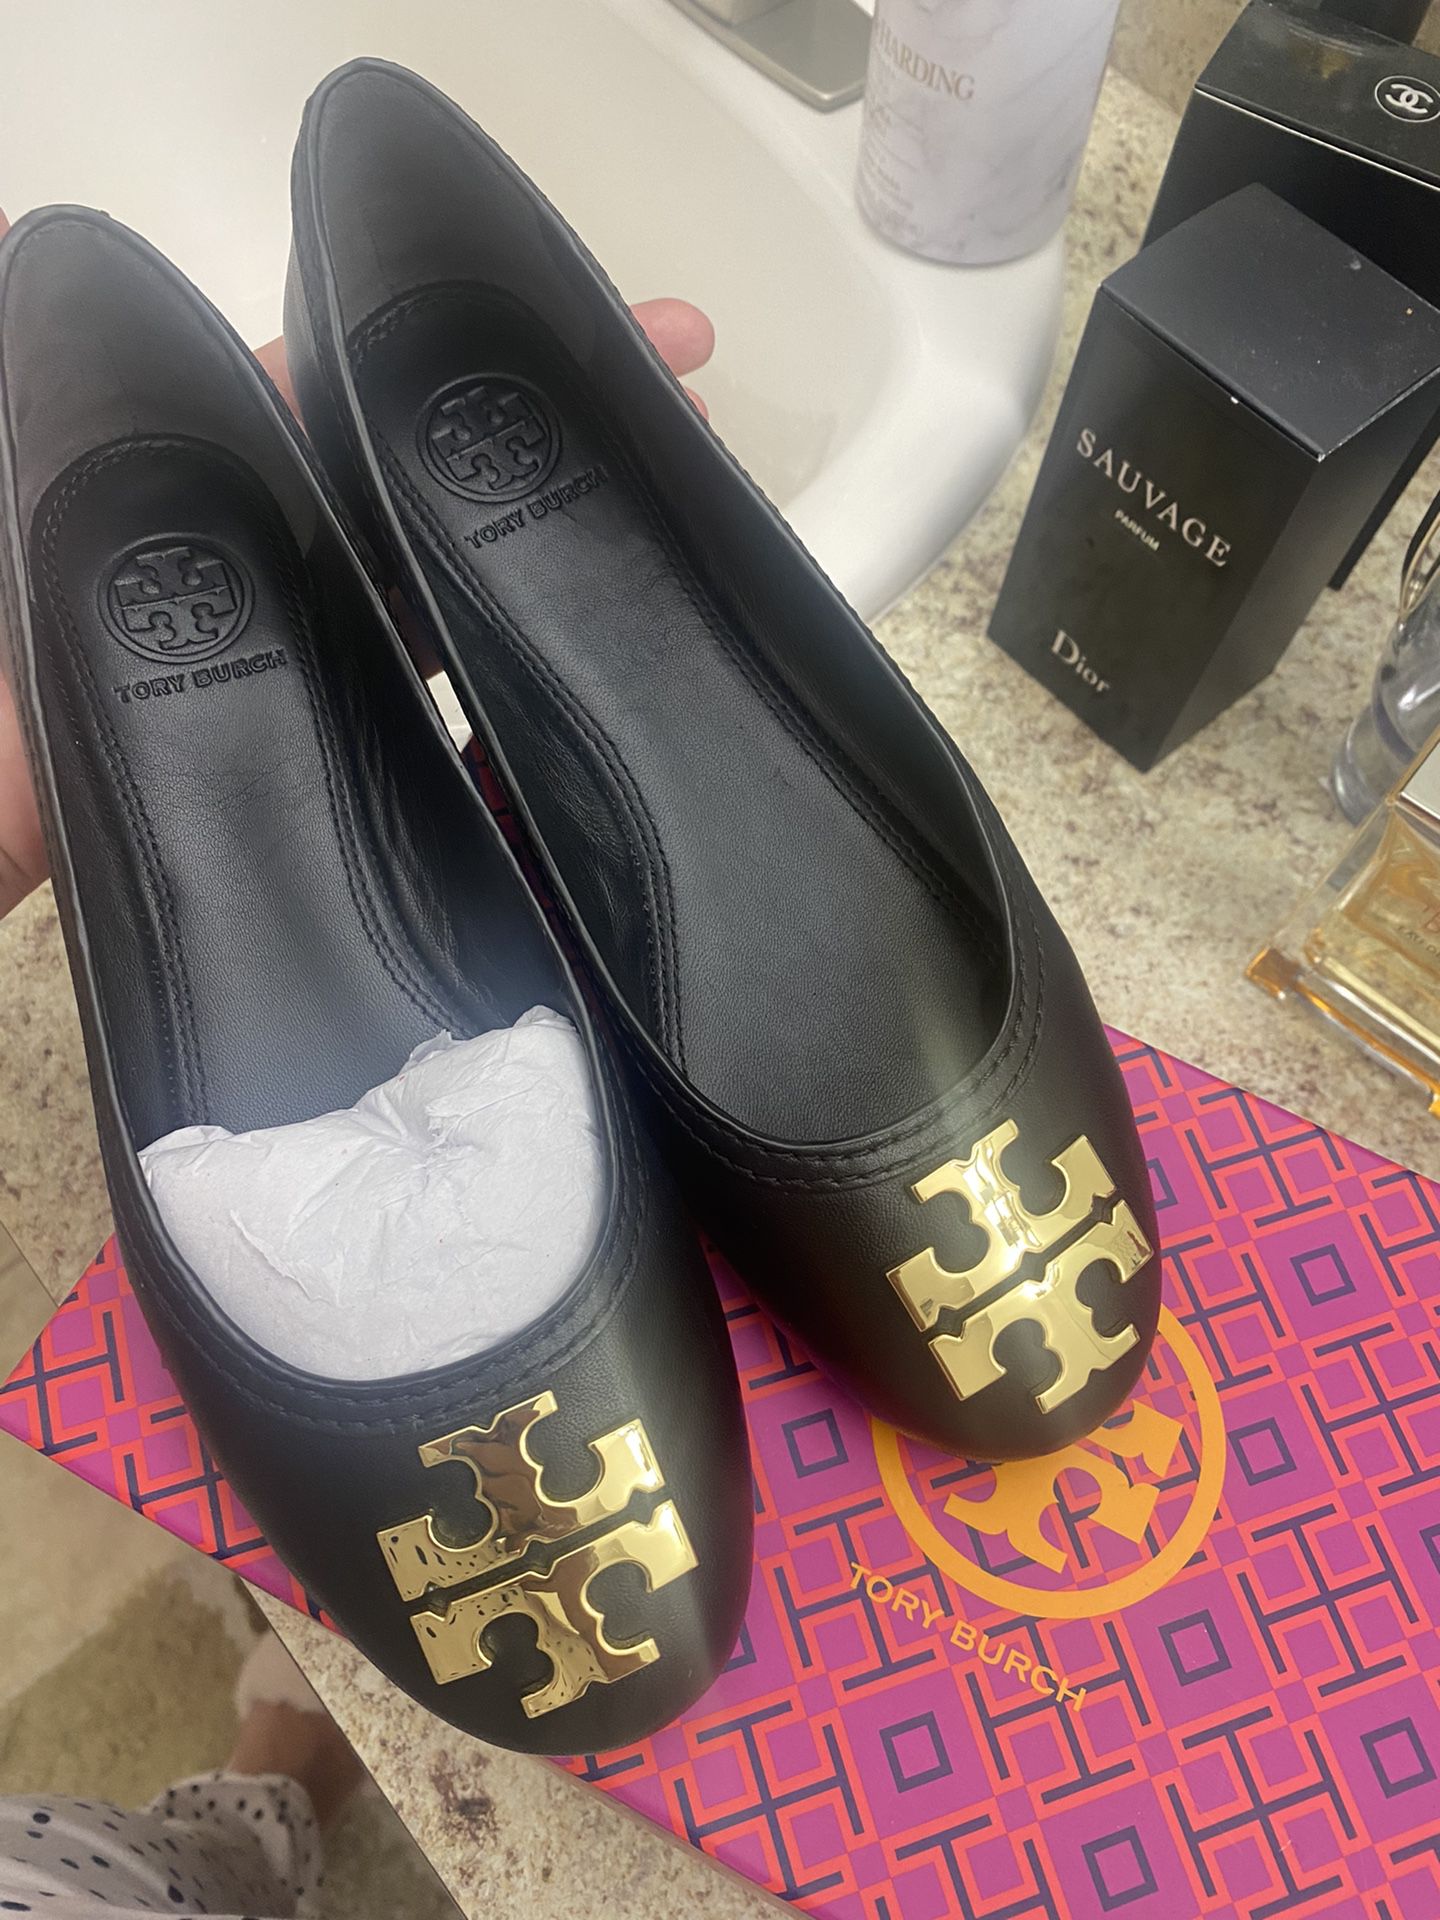 Tory Burch Flats for Sale in Cape Coral, FL - OfferUp